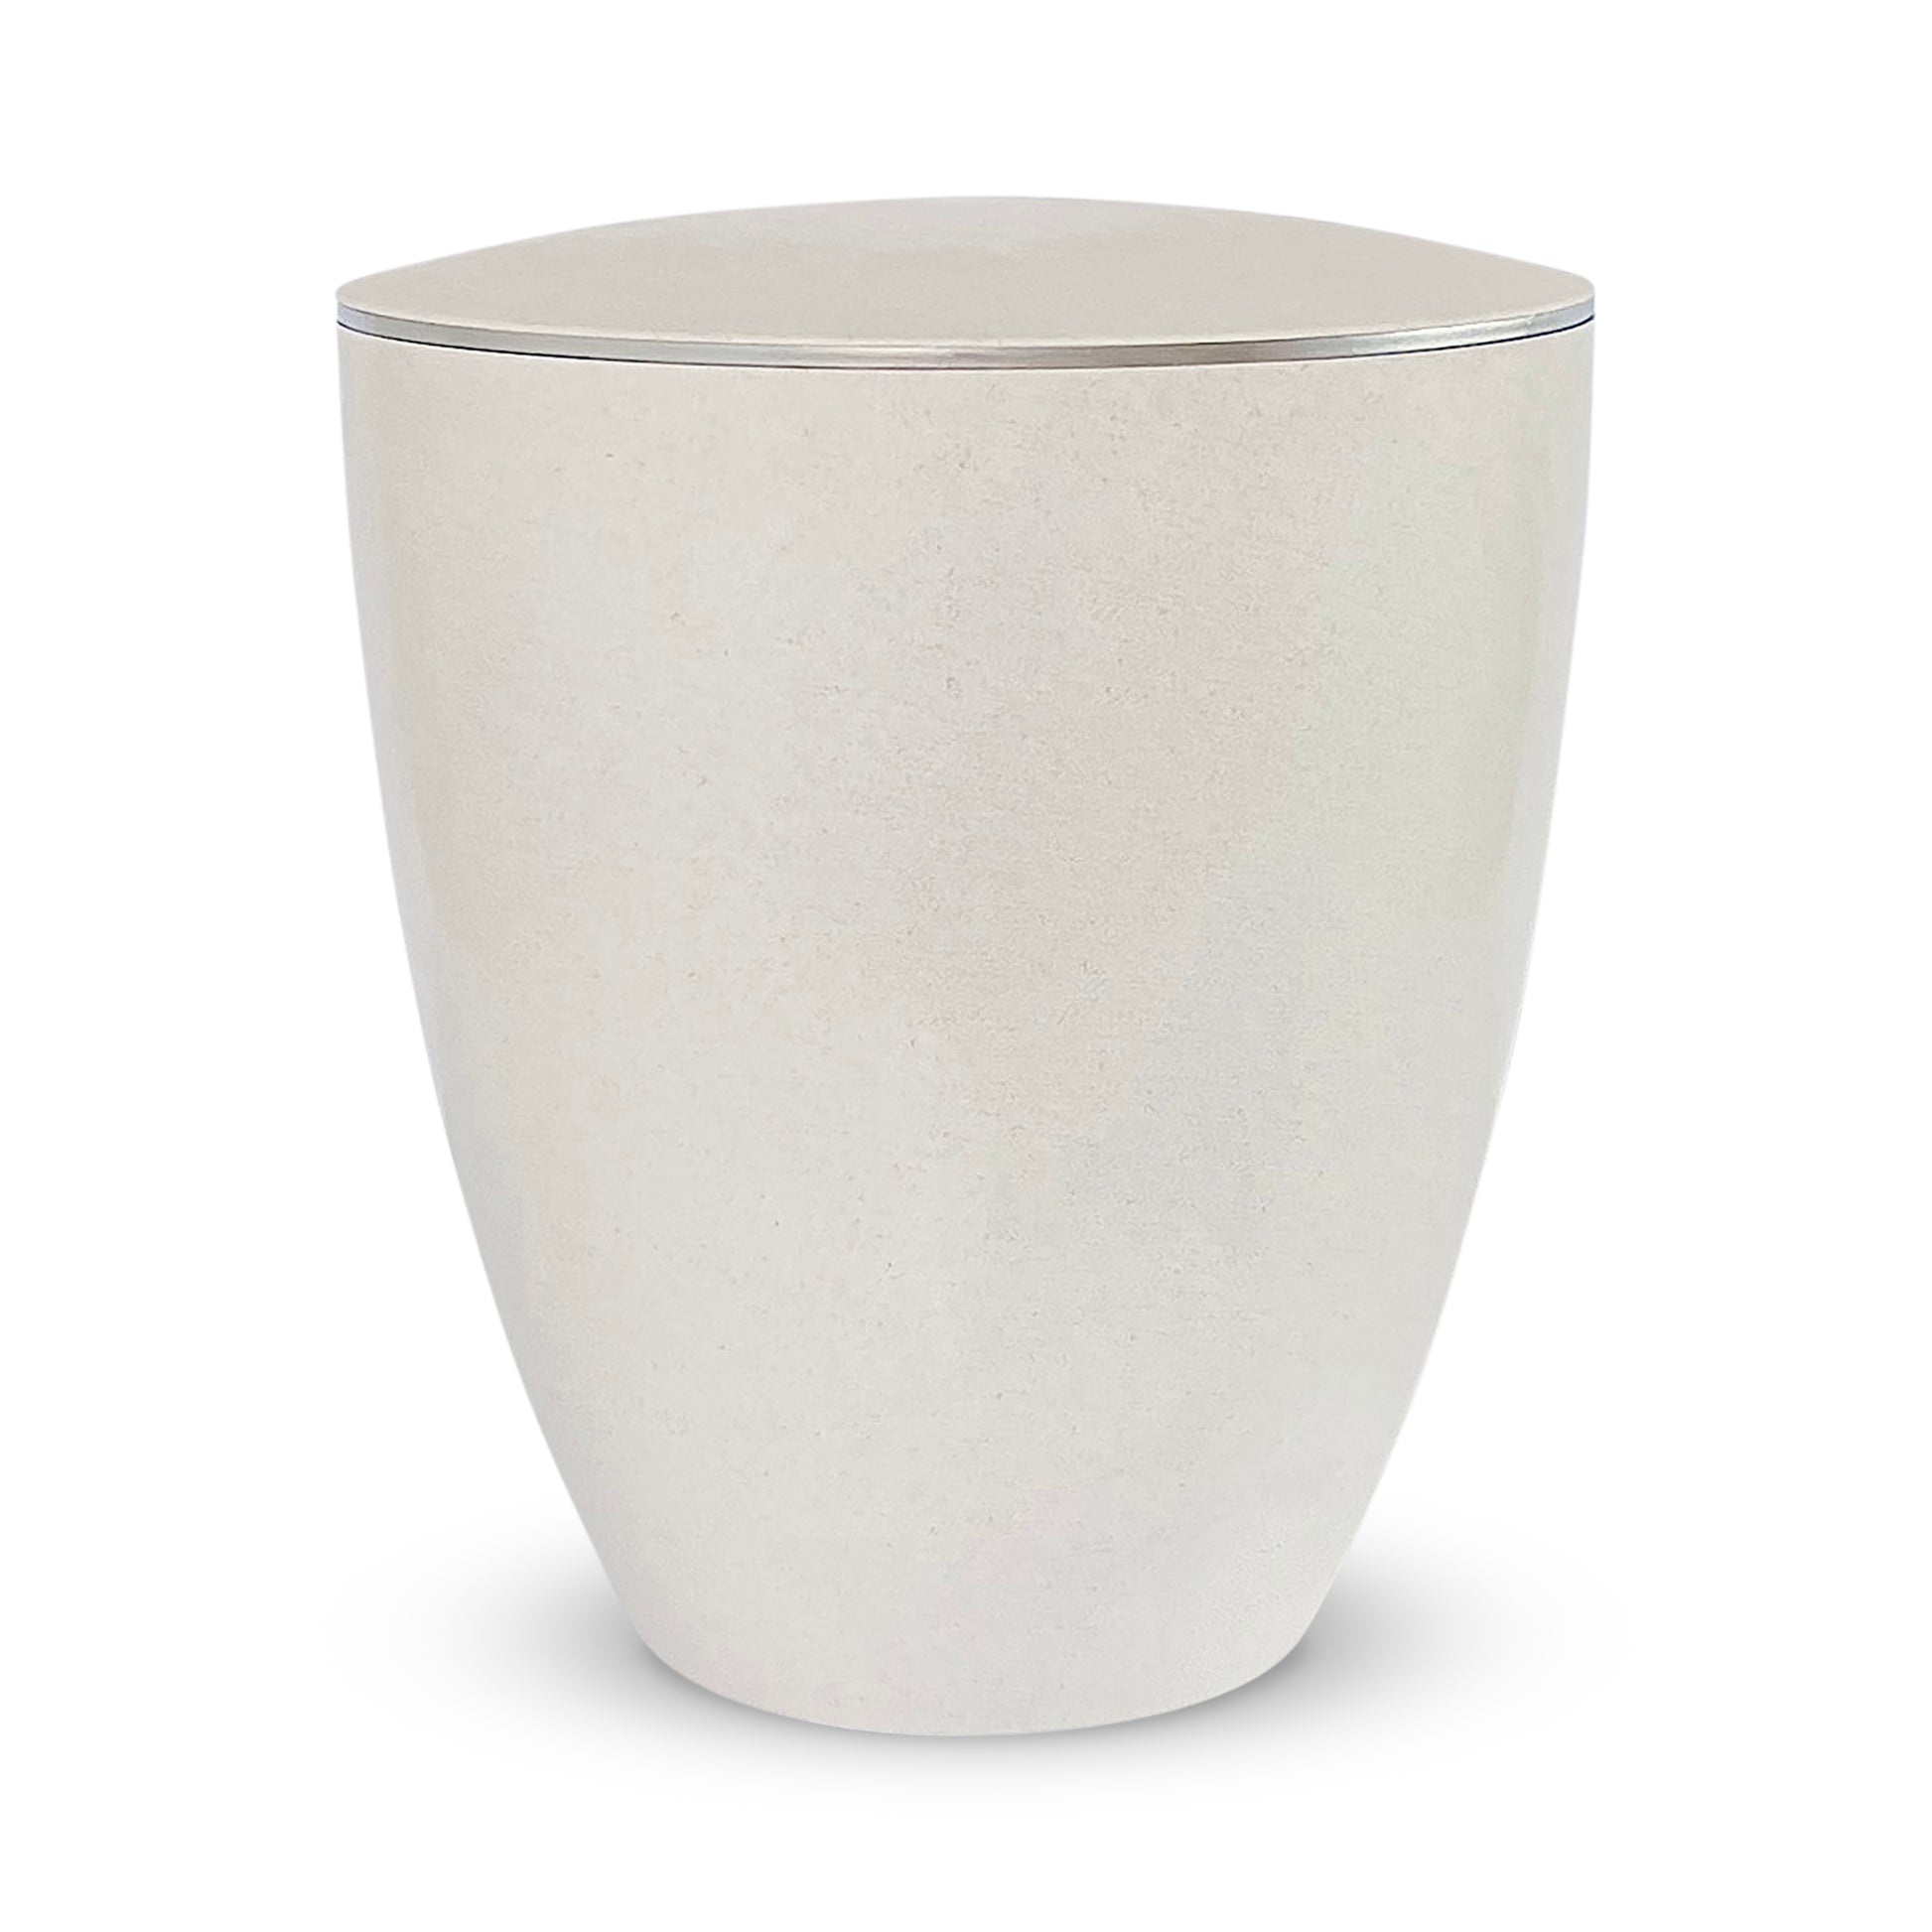 Elegant off-white urn for ashes with a delicate silver ring.